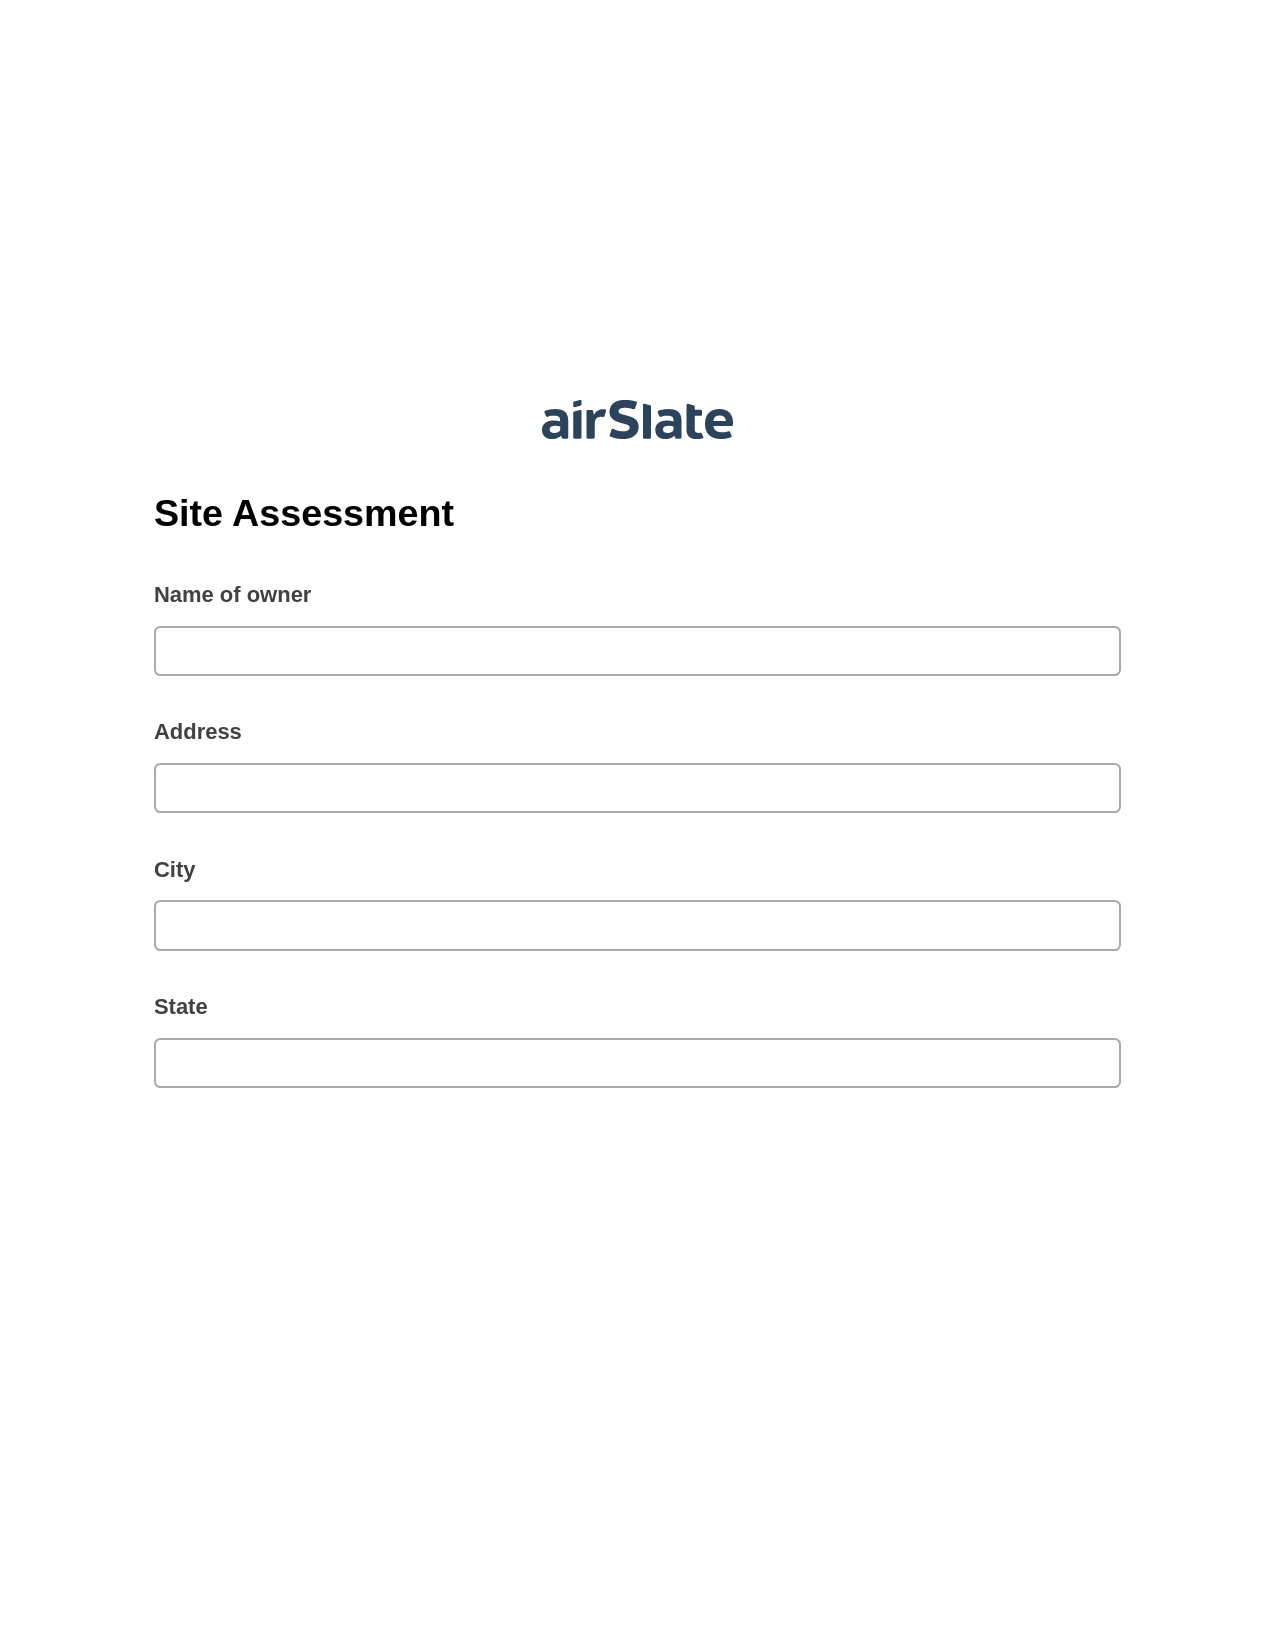 Site Assessment Pre-fill Document Bot, System Bot - Create a Slate in another Flow, Google Drive Bot